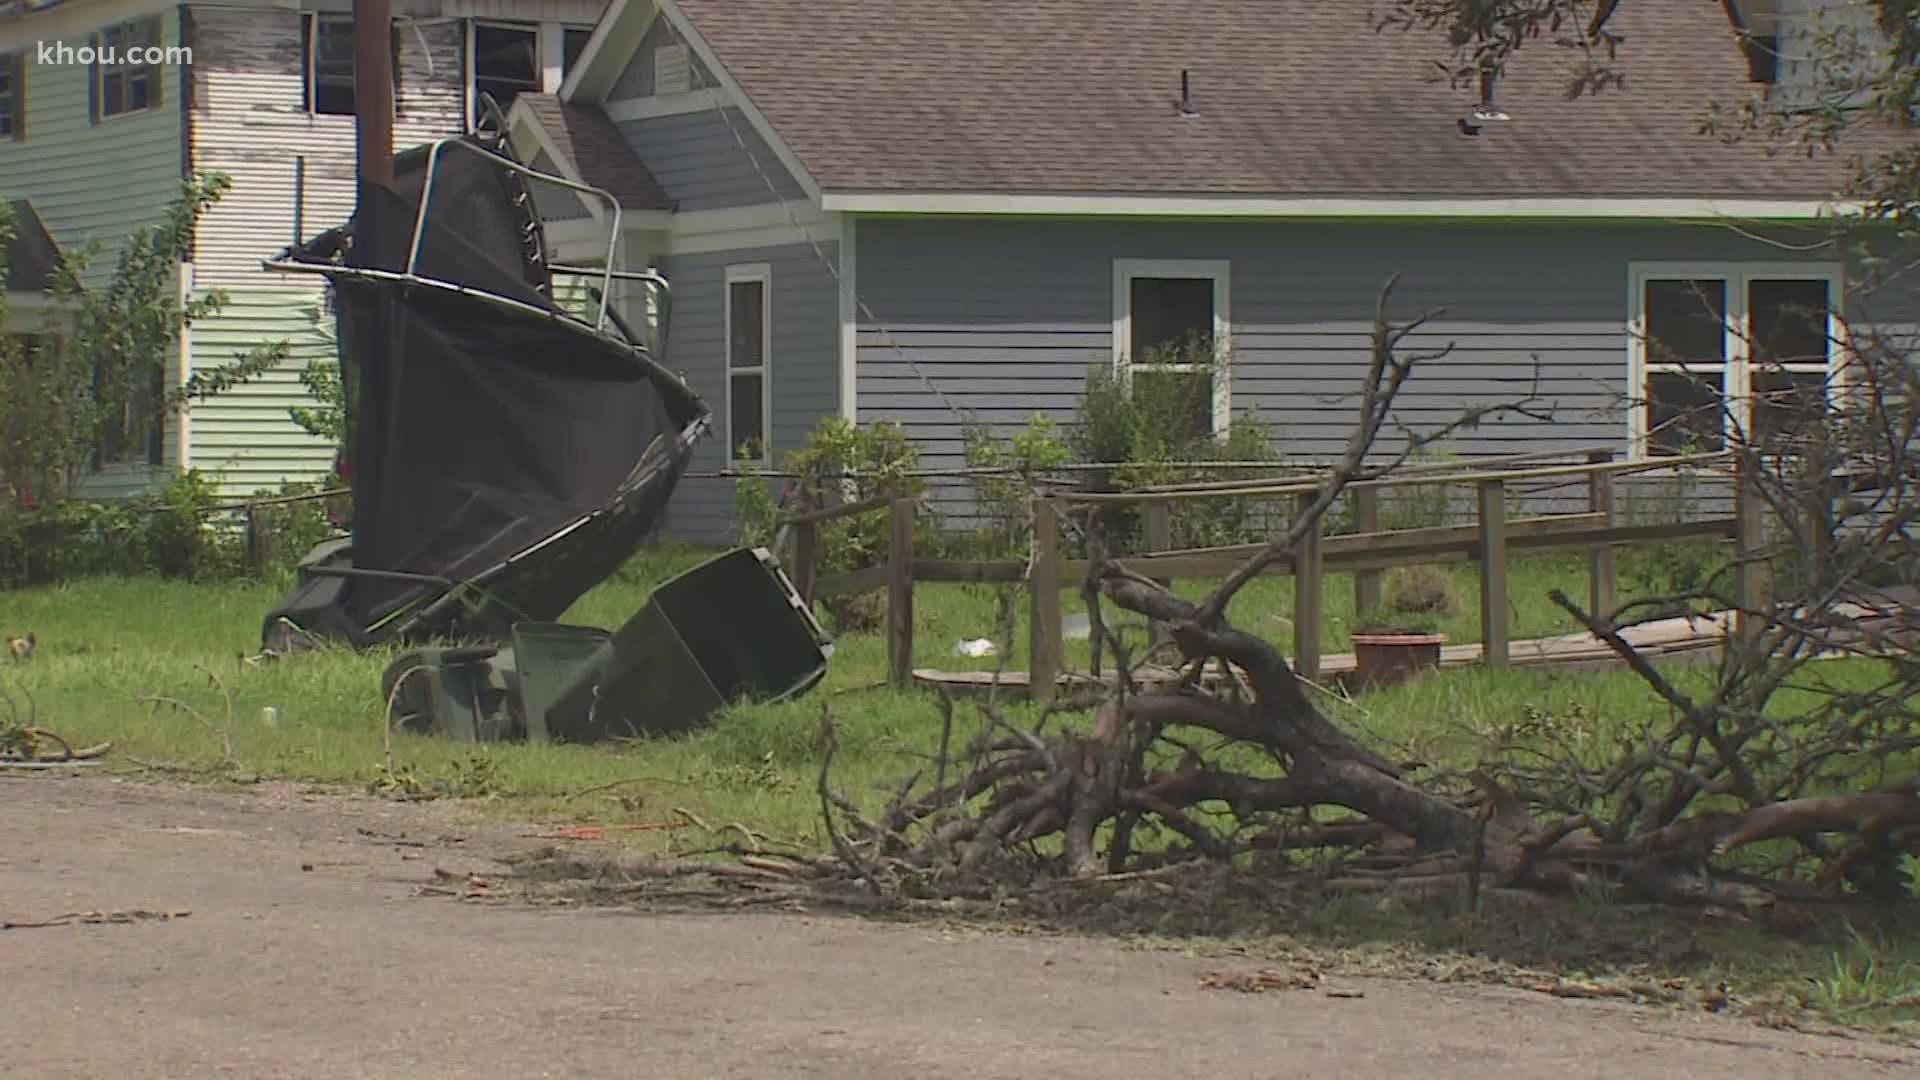 Those who evacuated from Port Arthur ahead of Hurricane Laura returned home to clean up damage.